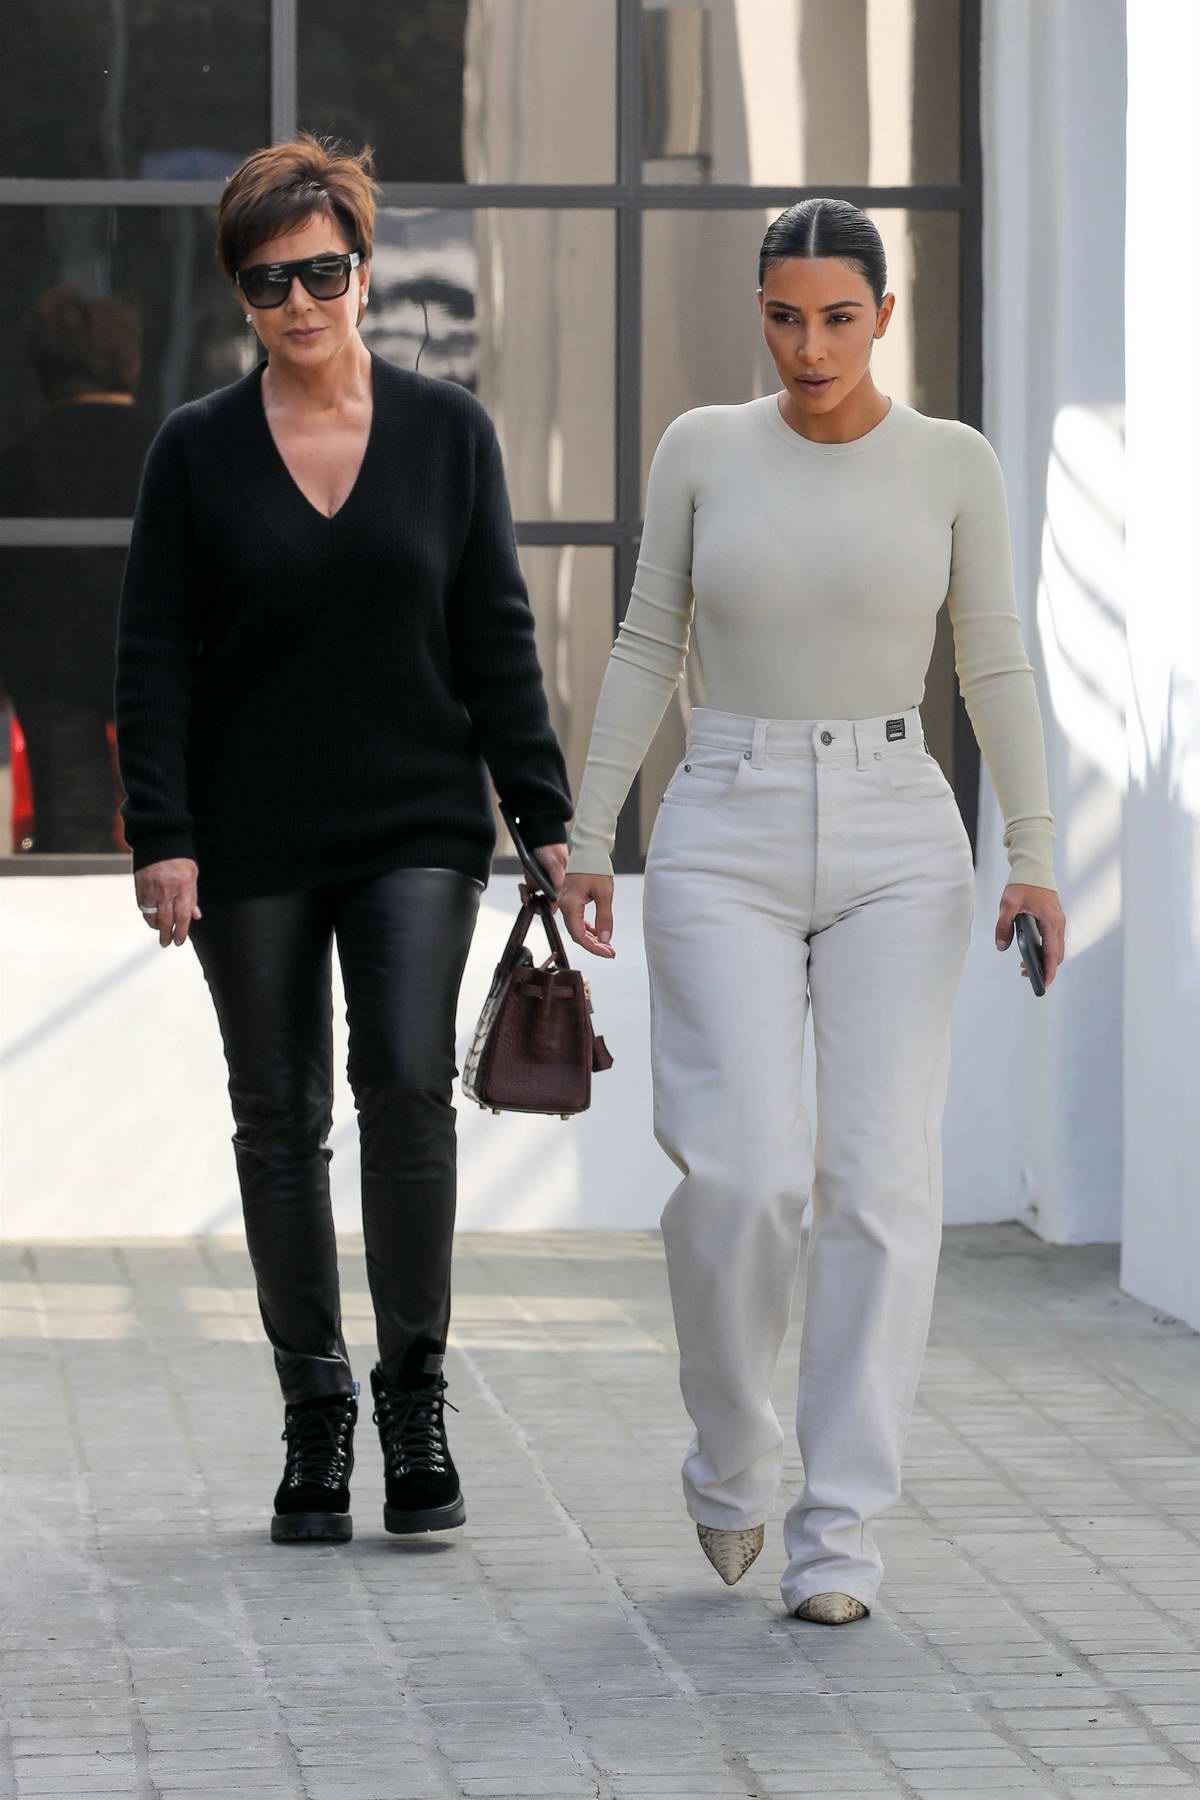 Kim Kardashian And Kris Jenner Seen While Paying A Visit To Grandma Mary Jo Campbell In Los Angeles